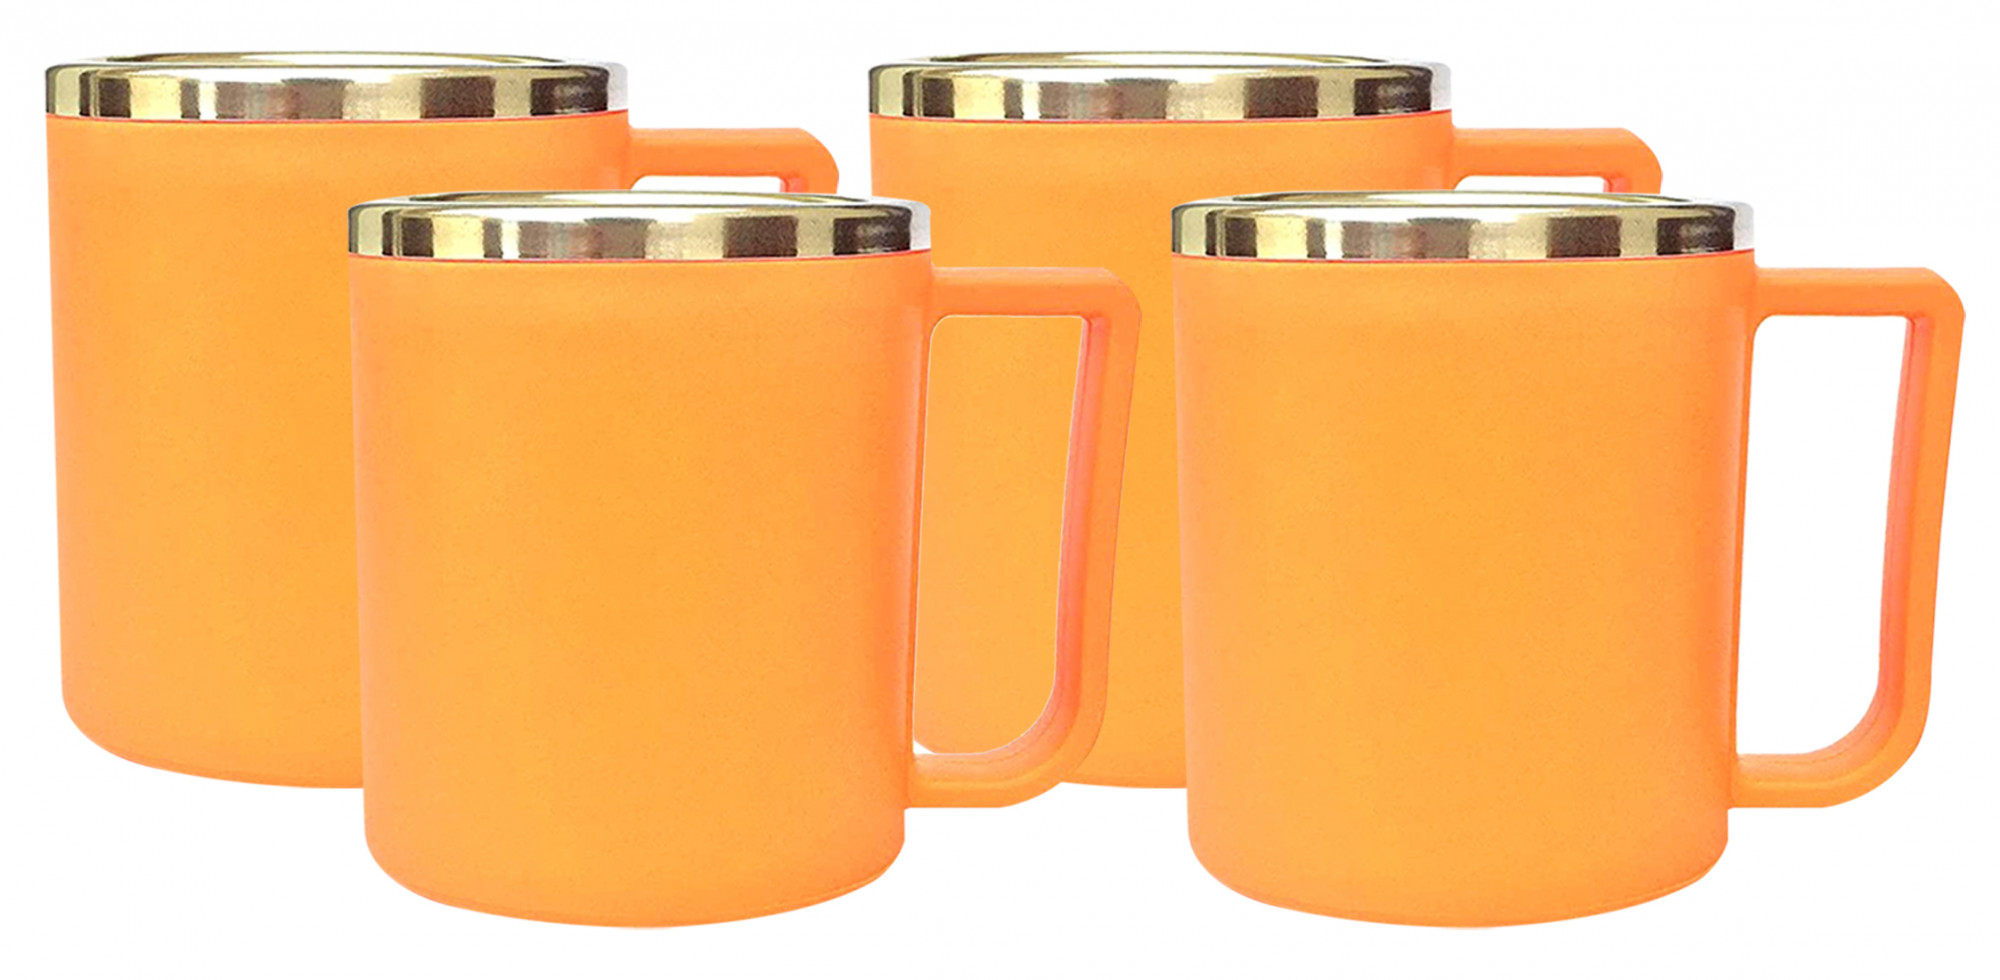 Kuber Industries Medium Size Plastic Steel Cups for Coffee Tea Cocoa, Camping Mugs with Handle, Portable & Easy Clean,(Orange)